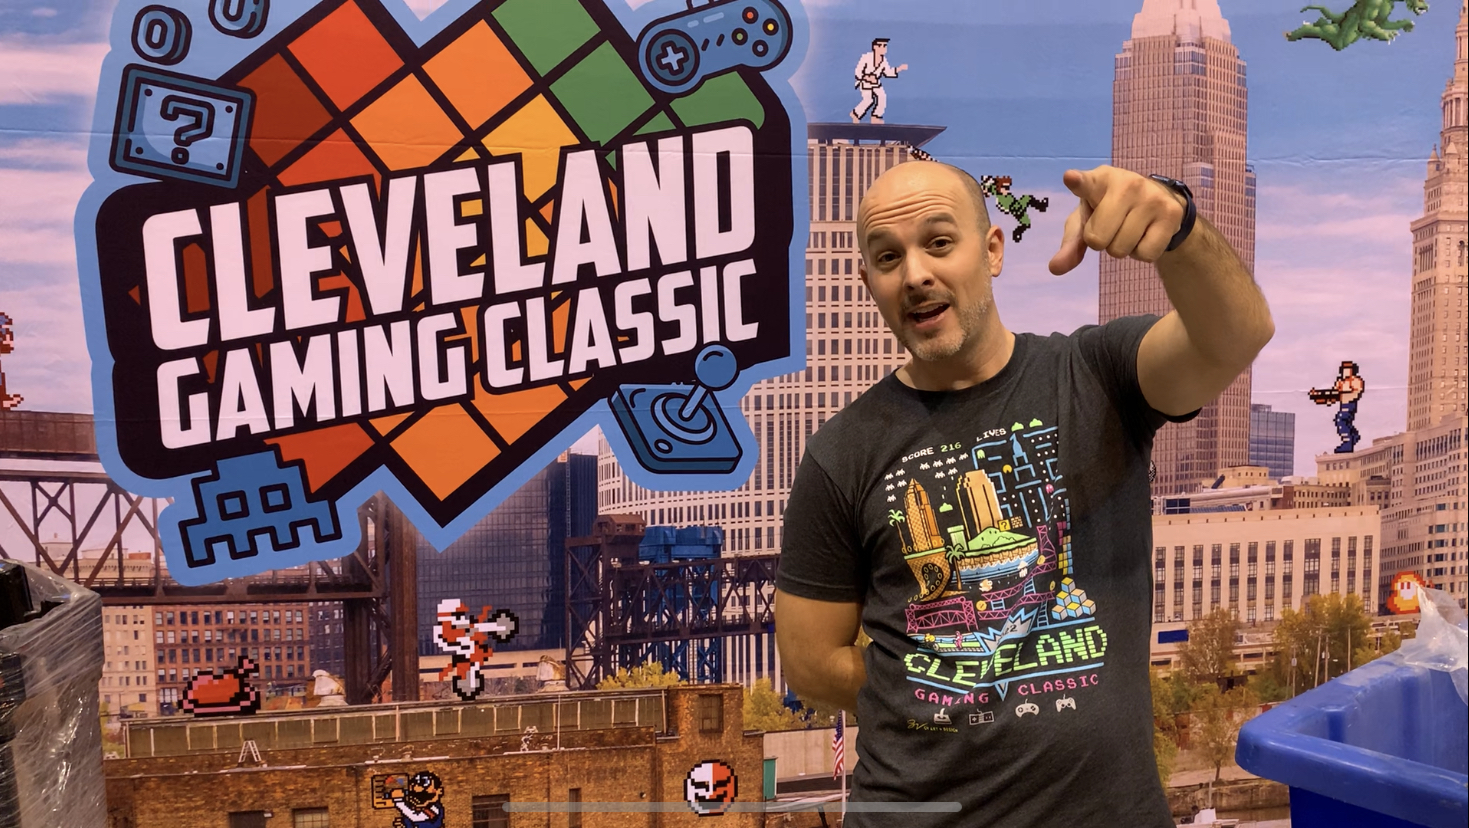 VIDEO Toy Hunt 154! Cleveland Gaming Classic Preview! Kee On Sports